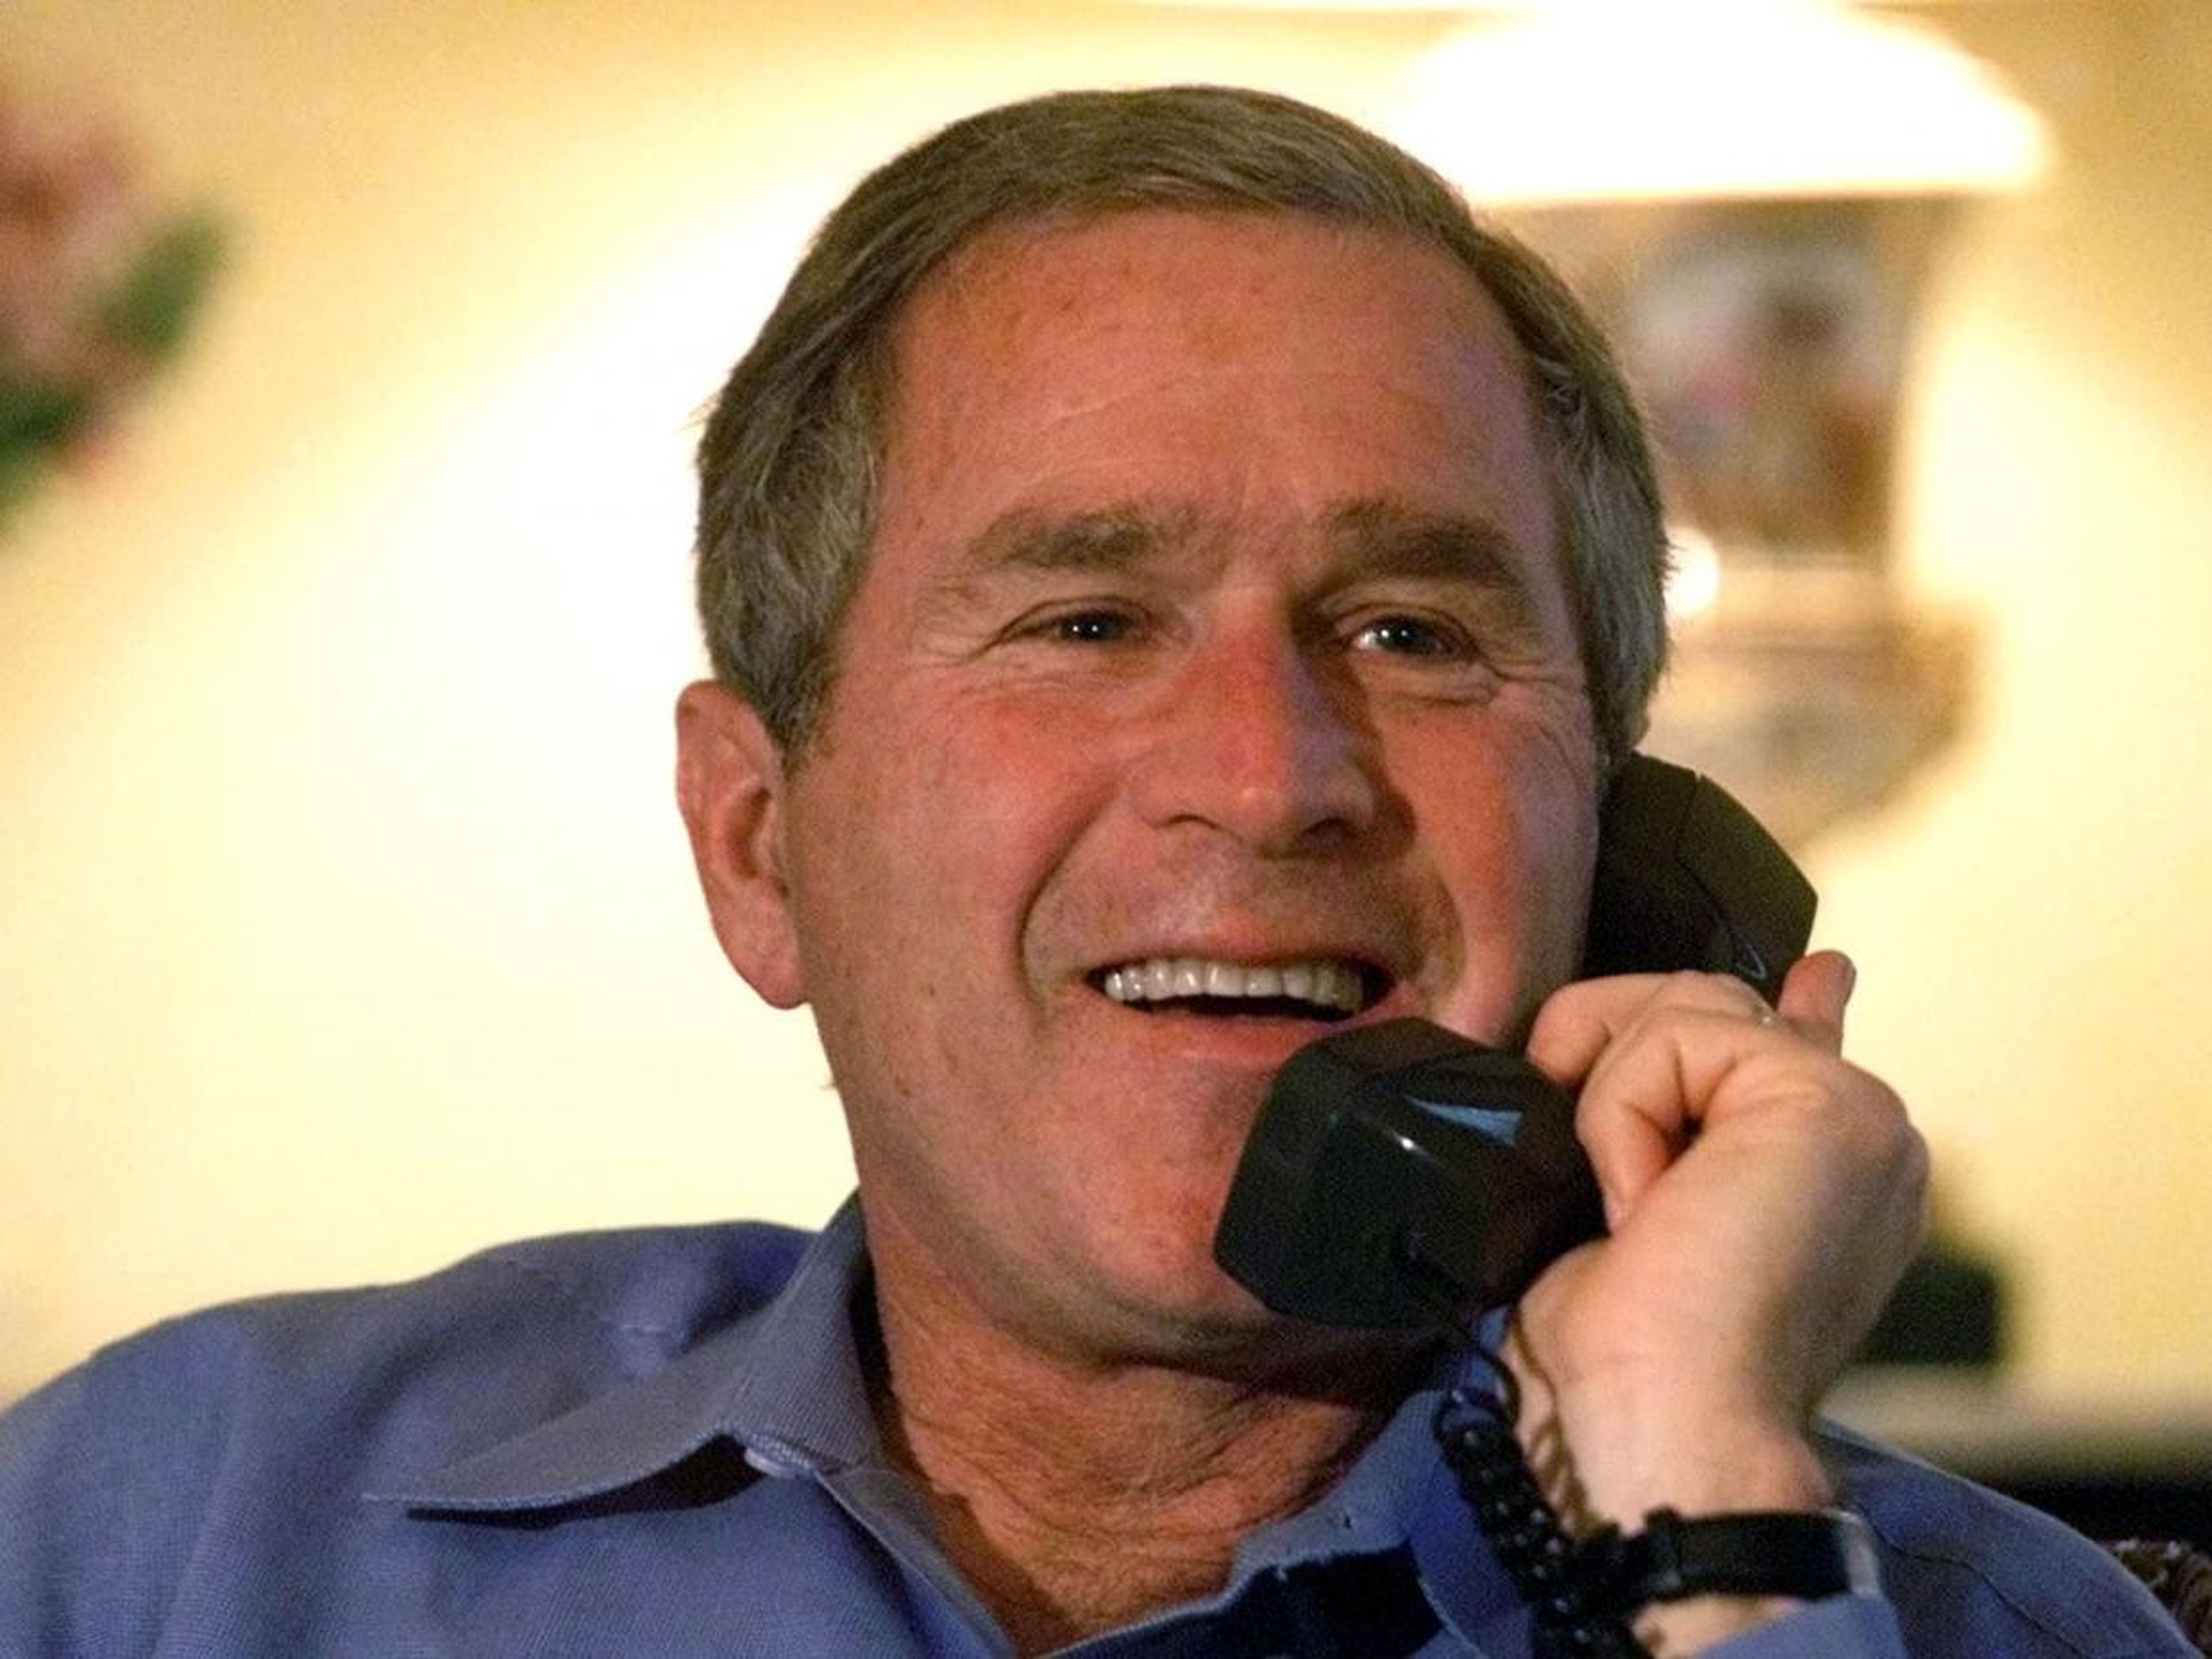 Here's George W. Bush making a phone call shortly after the 2000 election.